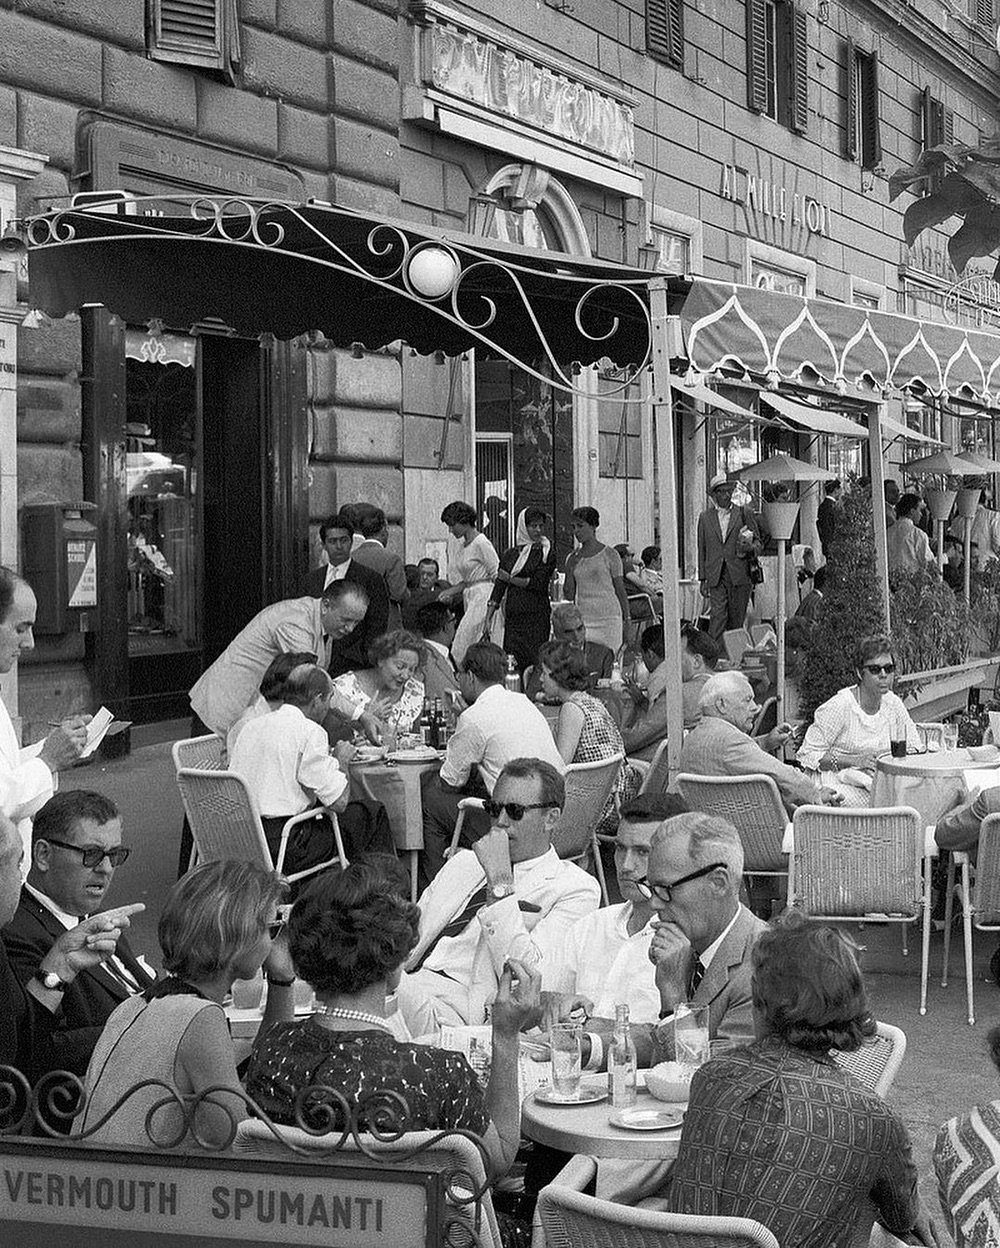 BACK IN THE DAYS ON THE STREETS OF ROME 🇮🇹 

Let&rsquo;s hit the road and get an Aperol Spritz on a terrace in Rome. Go to the link in bio for the best restaurants and bars in Rome by The Bearleaders. Or go to Bearleaders.com. 

All praise goes to 